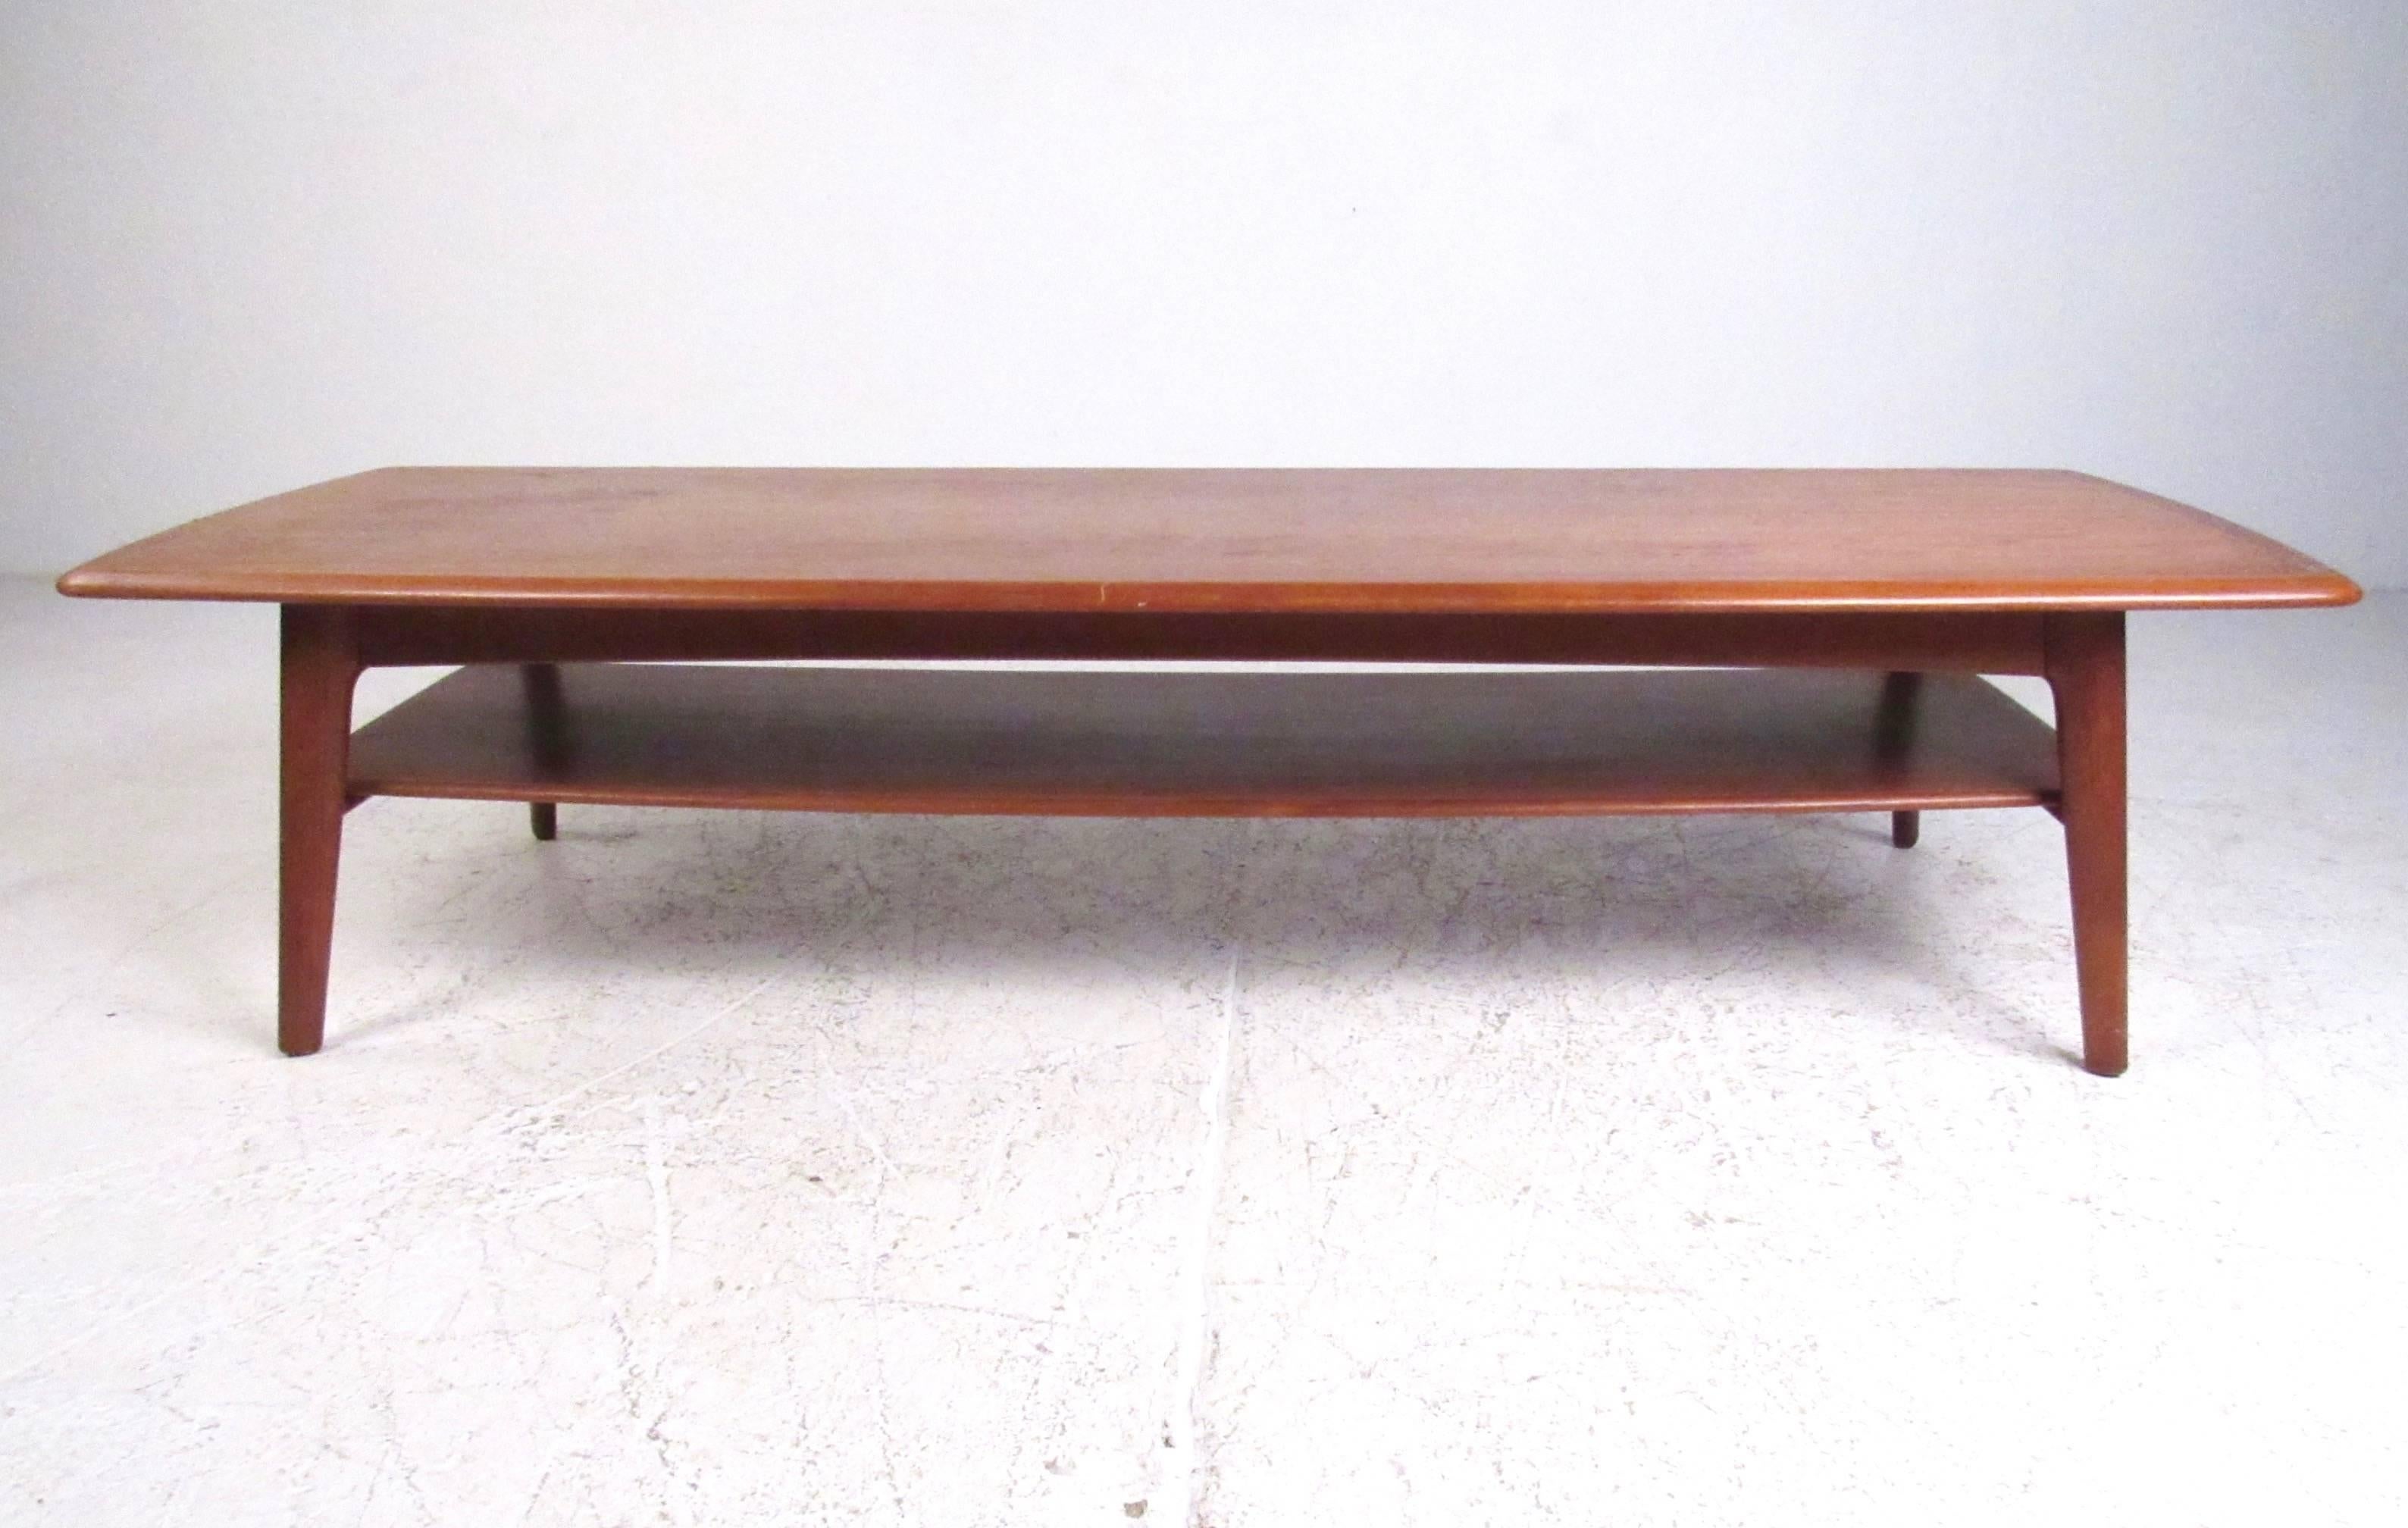 This unique vintage teak coffee table makes a substantial addition to any interior. At almost six feet long this impressive Danish Modern coffee table features tapered legs, shapely hardwood top, and a second tier storage shelf. Please confirm item